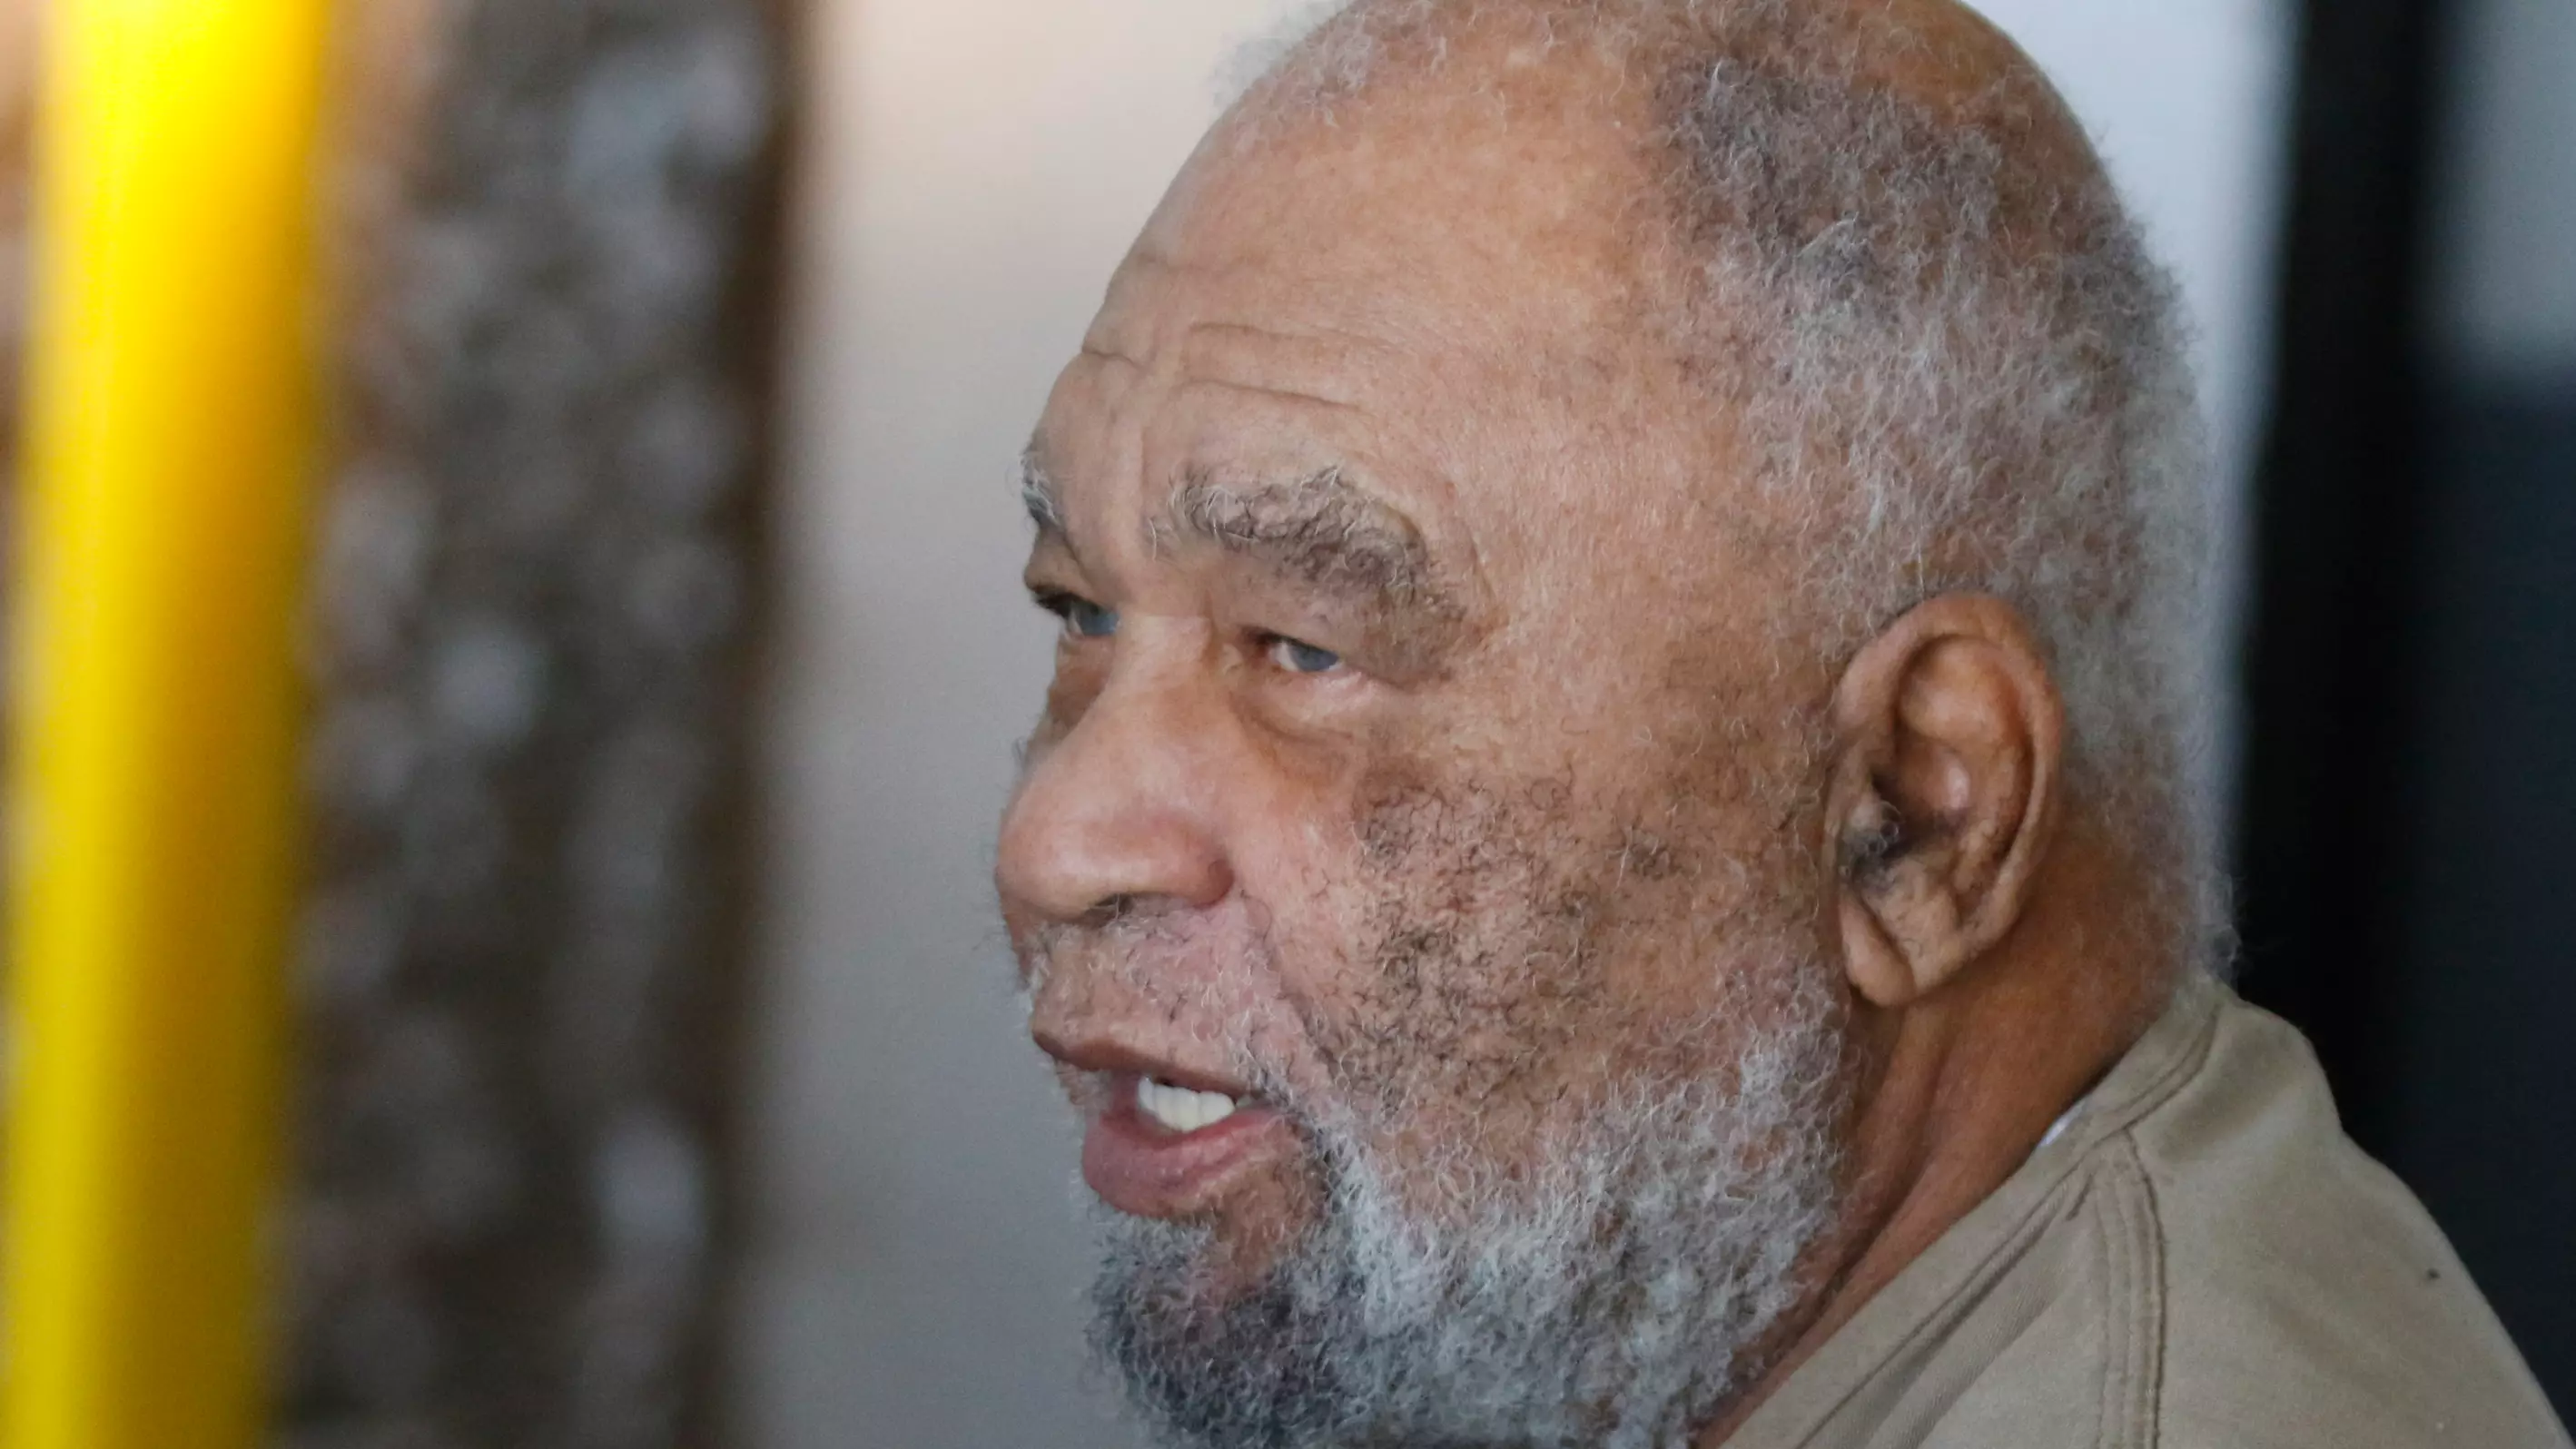 FBI Declares Samuel Little As The Most Prolific Serial Killer In US History